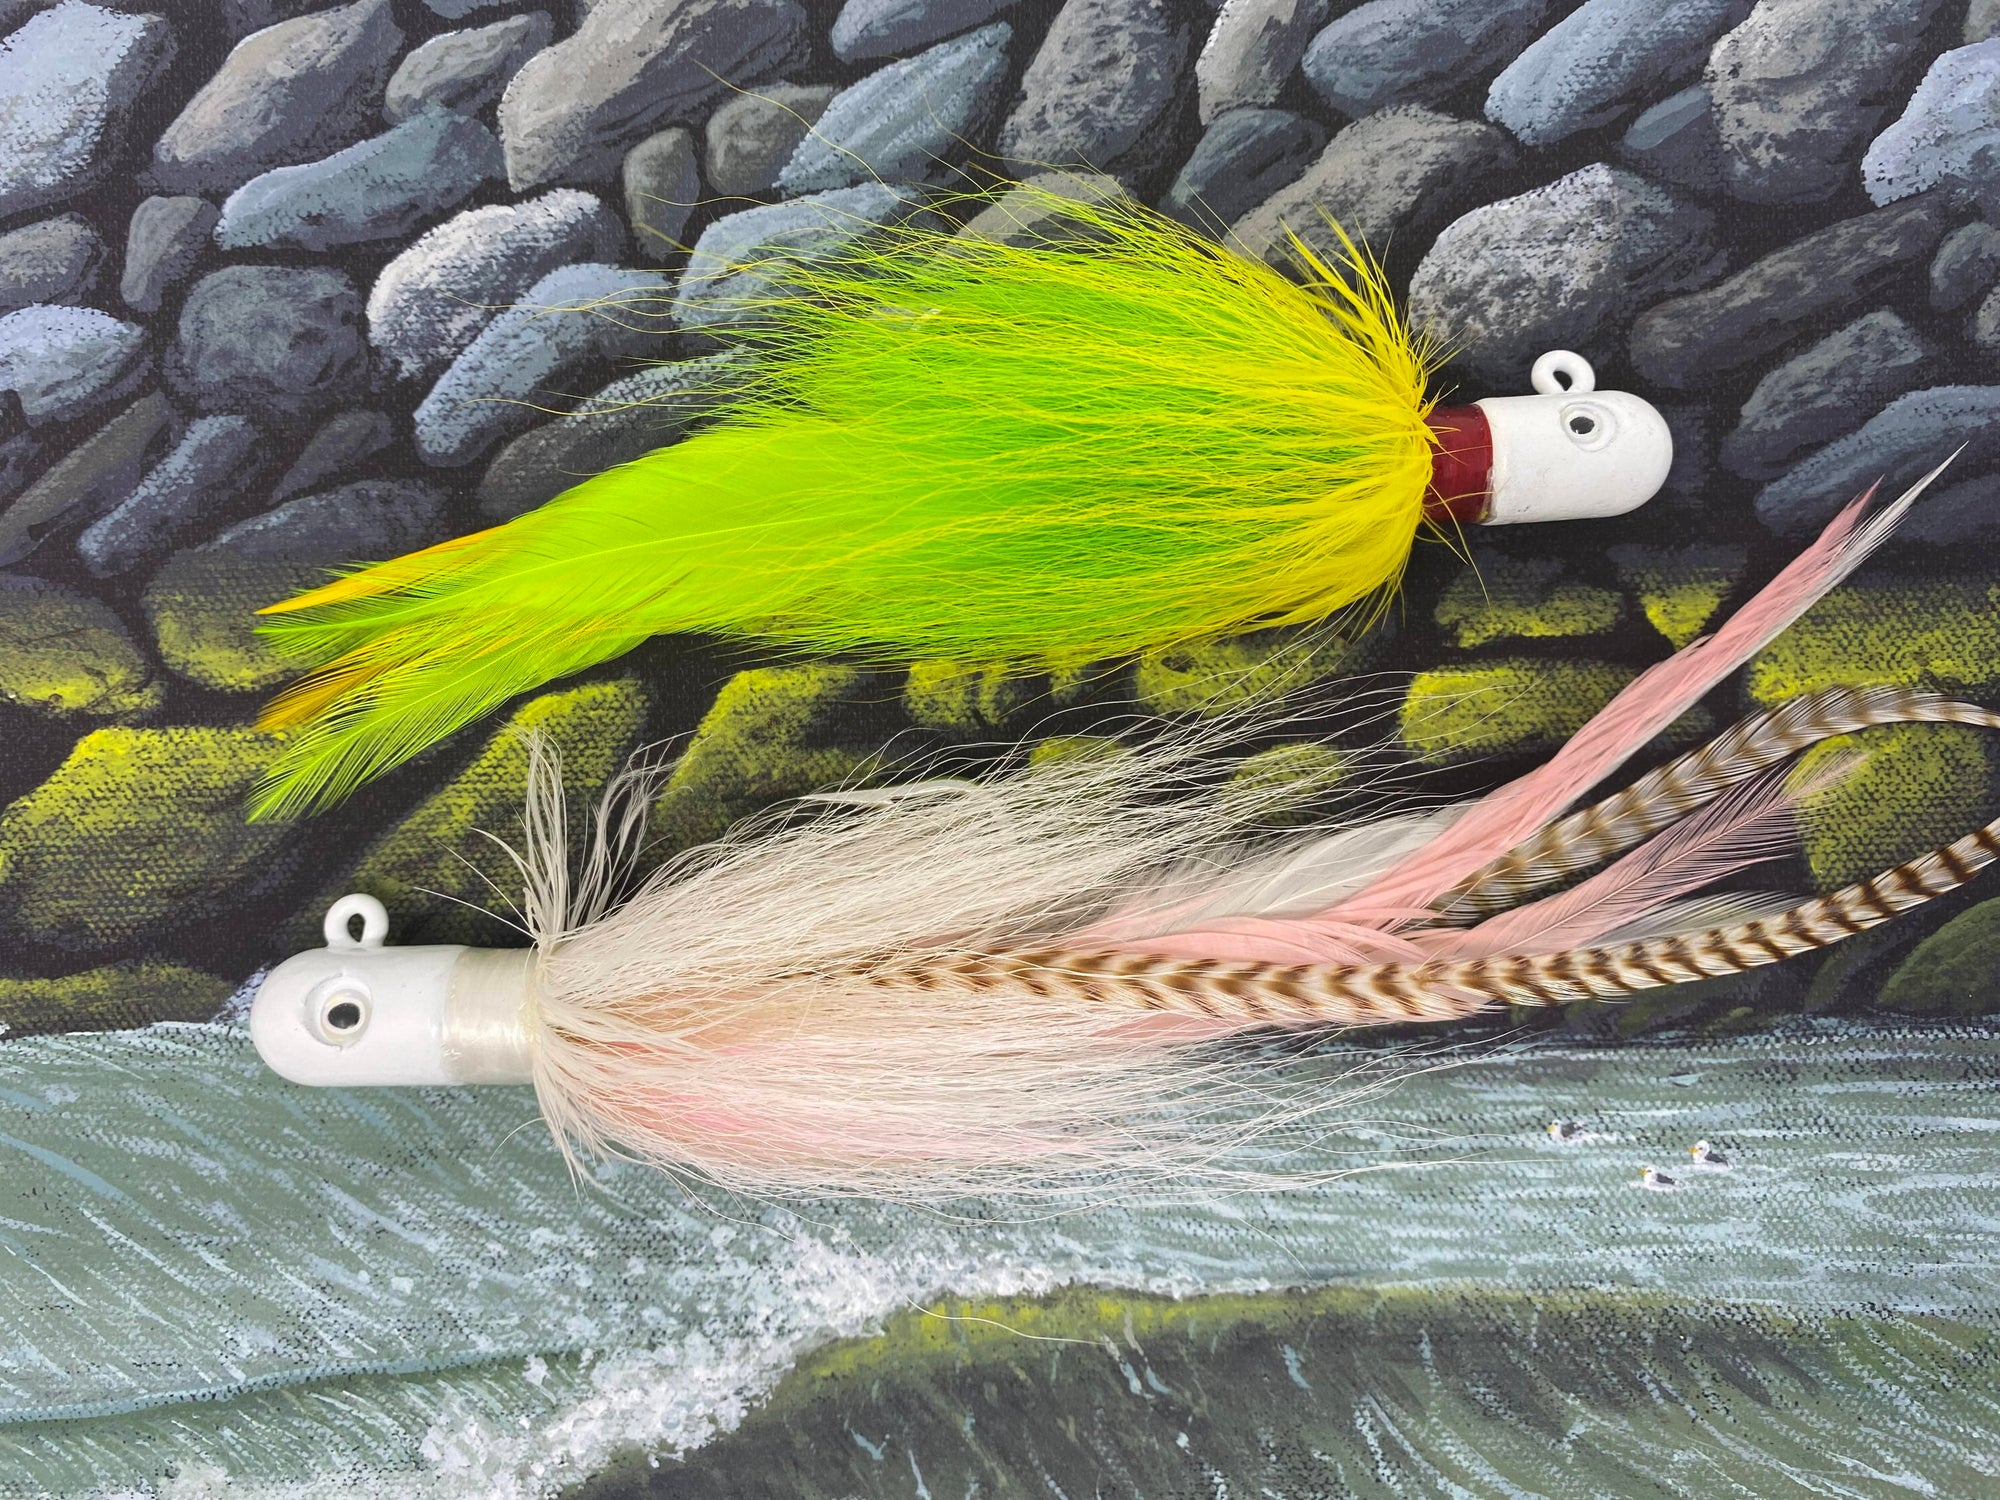 High Quality Saltwater Bucktails jigs, lures and fishing tackle for the  serious angler, specializing in hand tied saltwater bucktail jigs for striped  bass